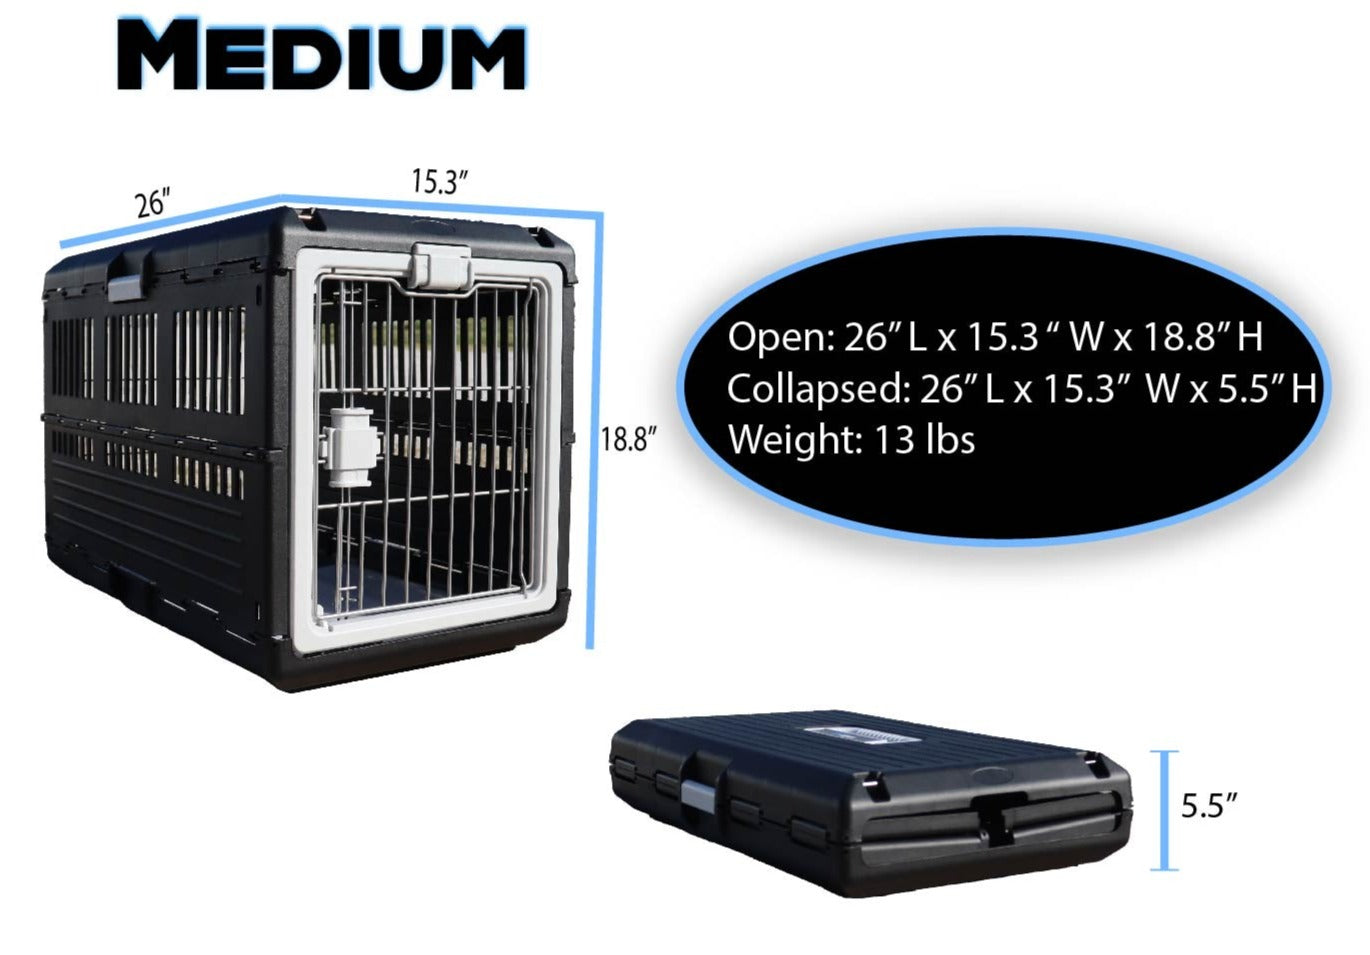 A photo of the Mirapet Medium Collapsible pet crate standing, and also closed with measurements around the sides. A black oval with white text that says "Open: 26" L x 15.3" W x 18.8"H Collapsed: 26"L x 15.3"W x5.5"H Weight: 13lbs 